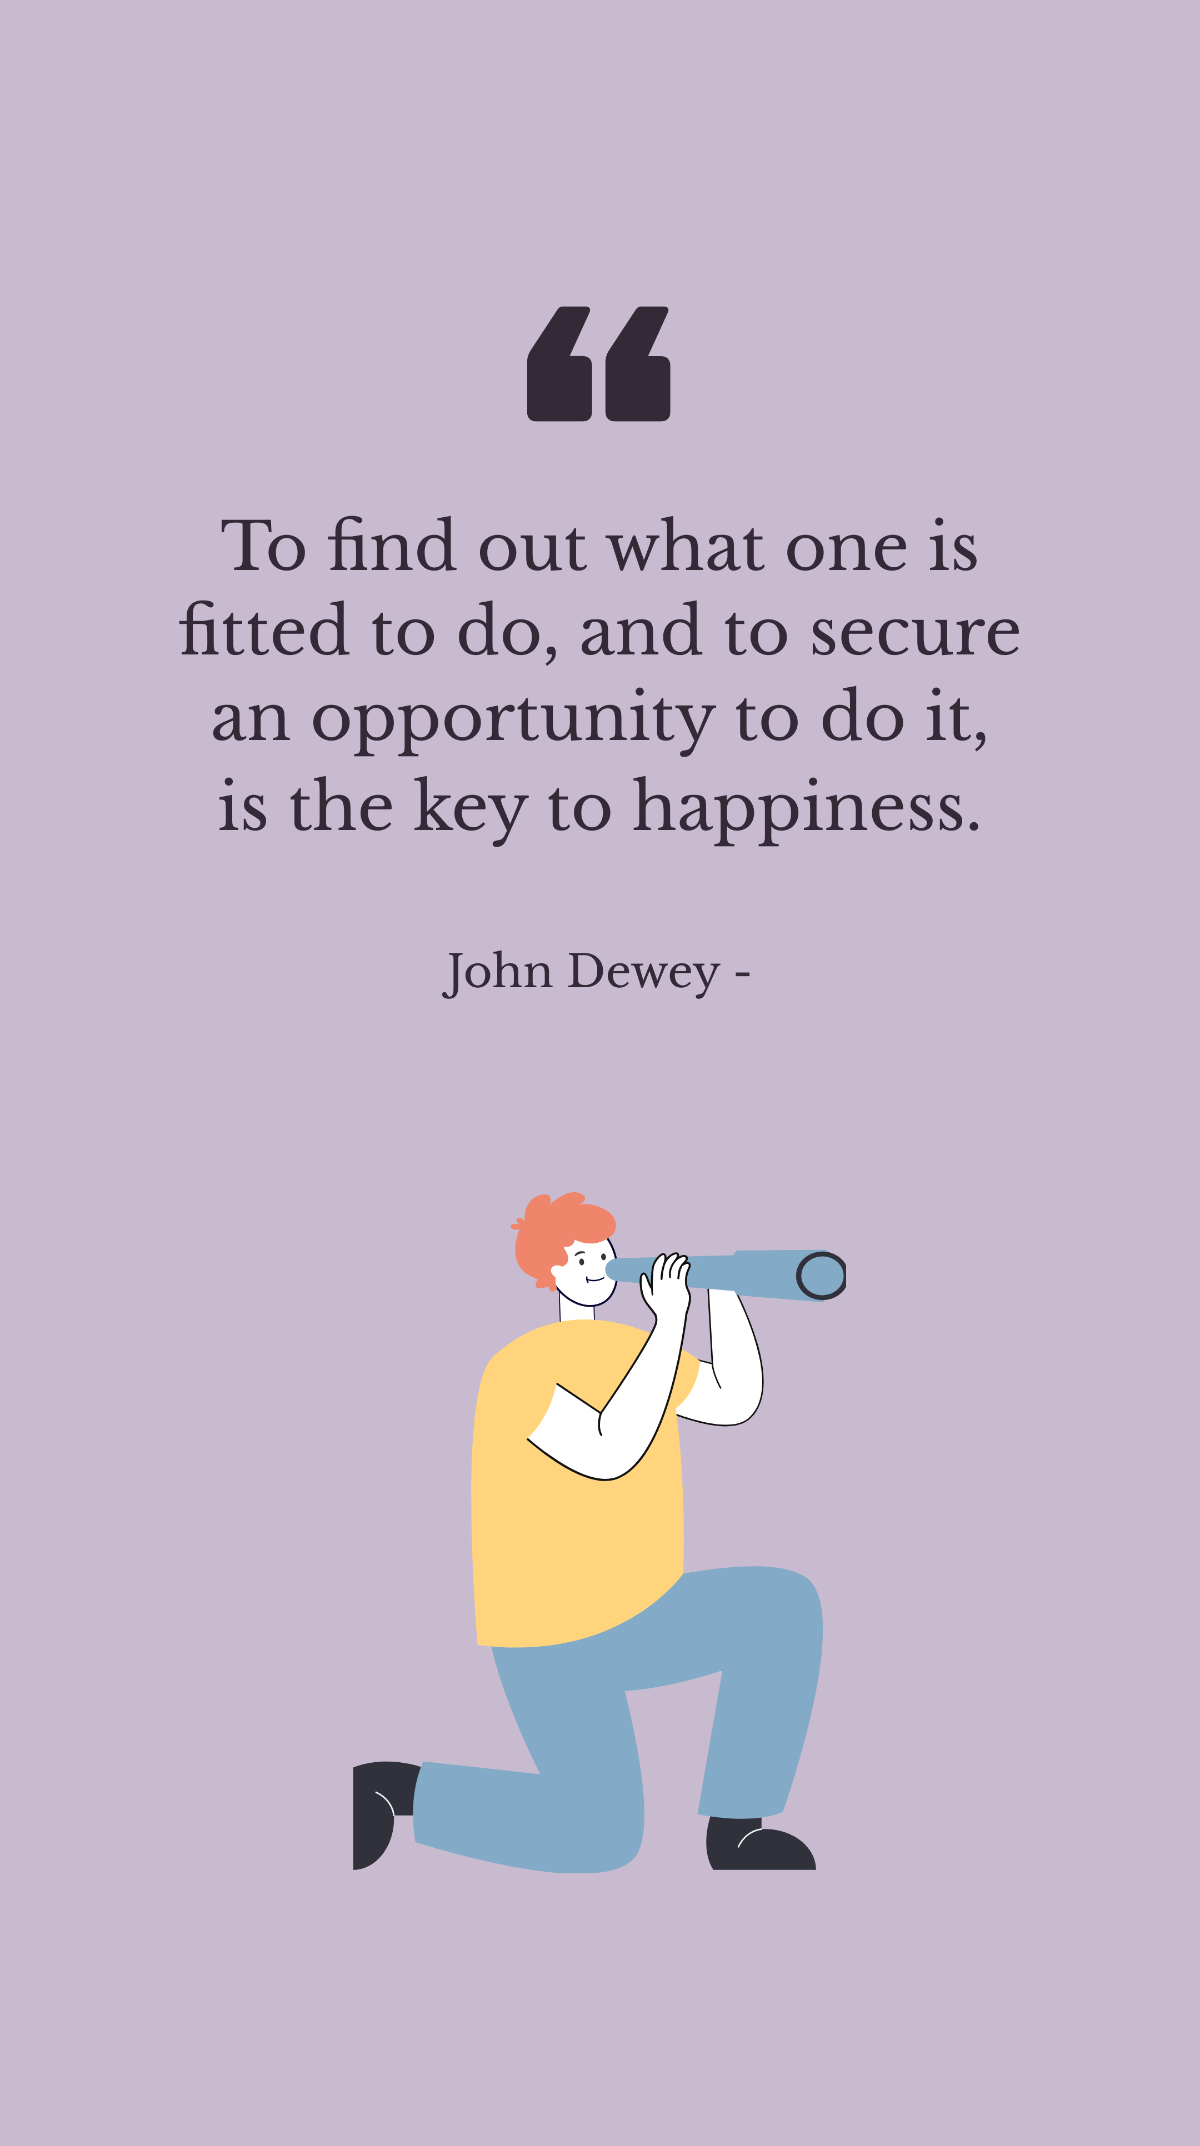 John Dewey - To find out what one is fitted to do, and to secure an opportunity to do it, is the key to happiness.